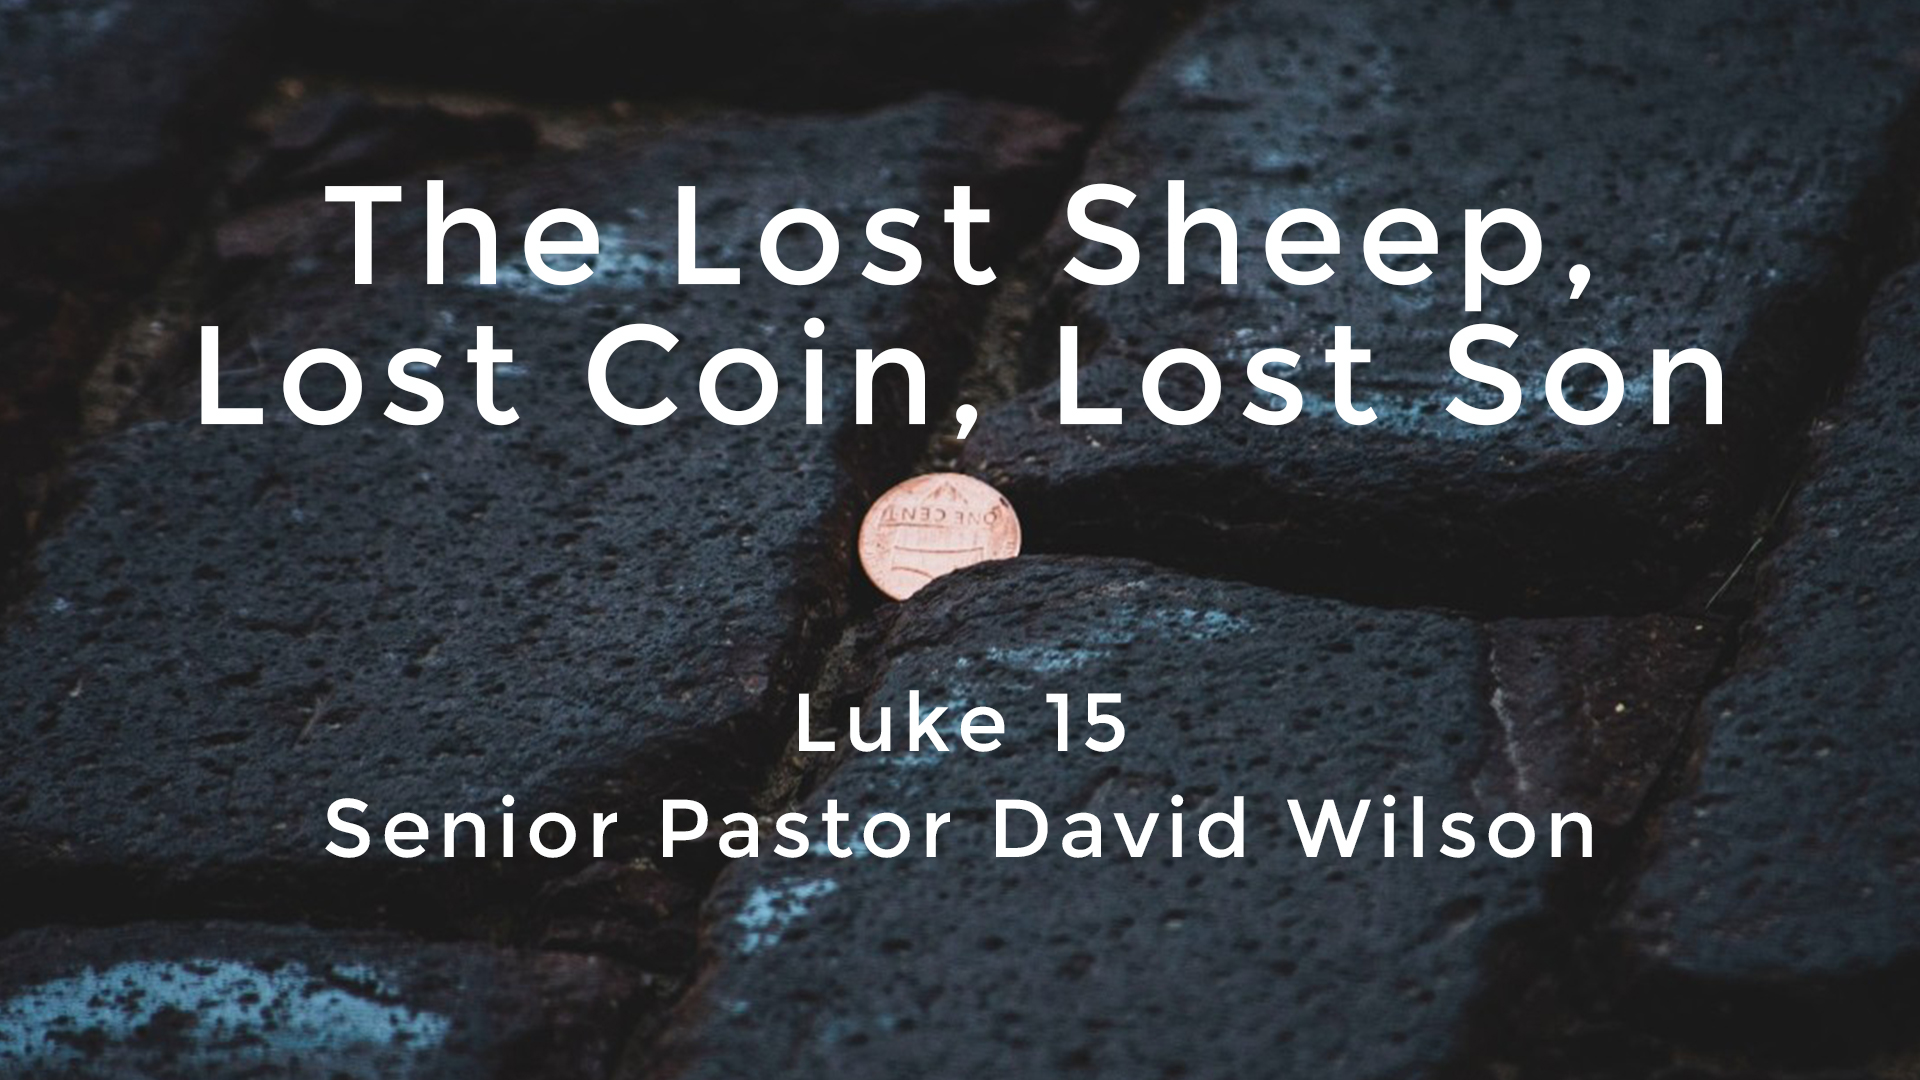 The Lost Sheep, Lost Coin, Lost Son